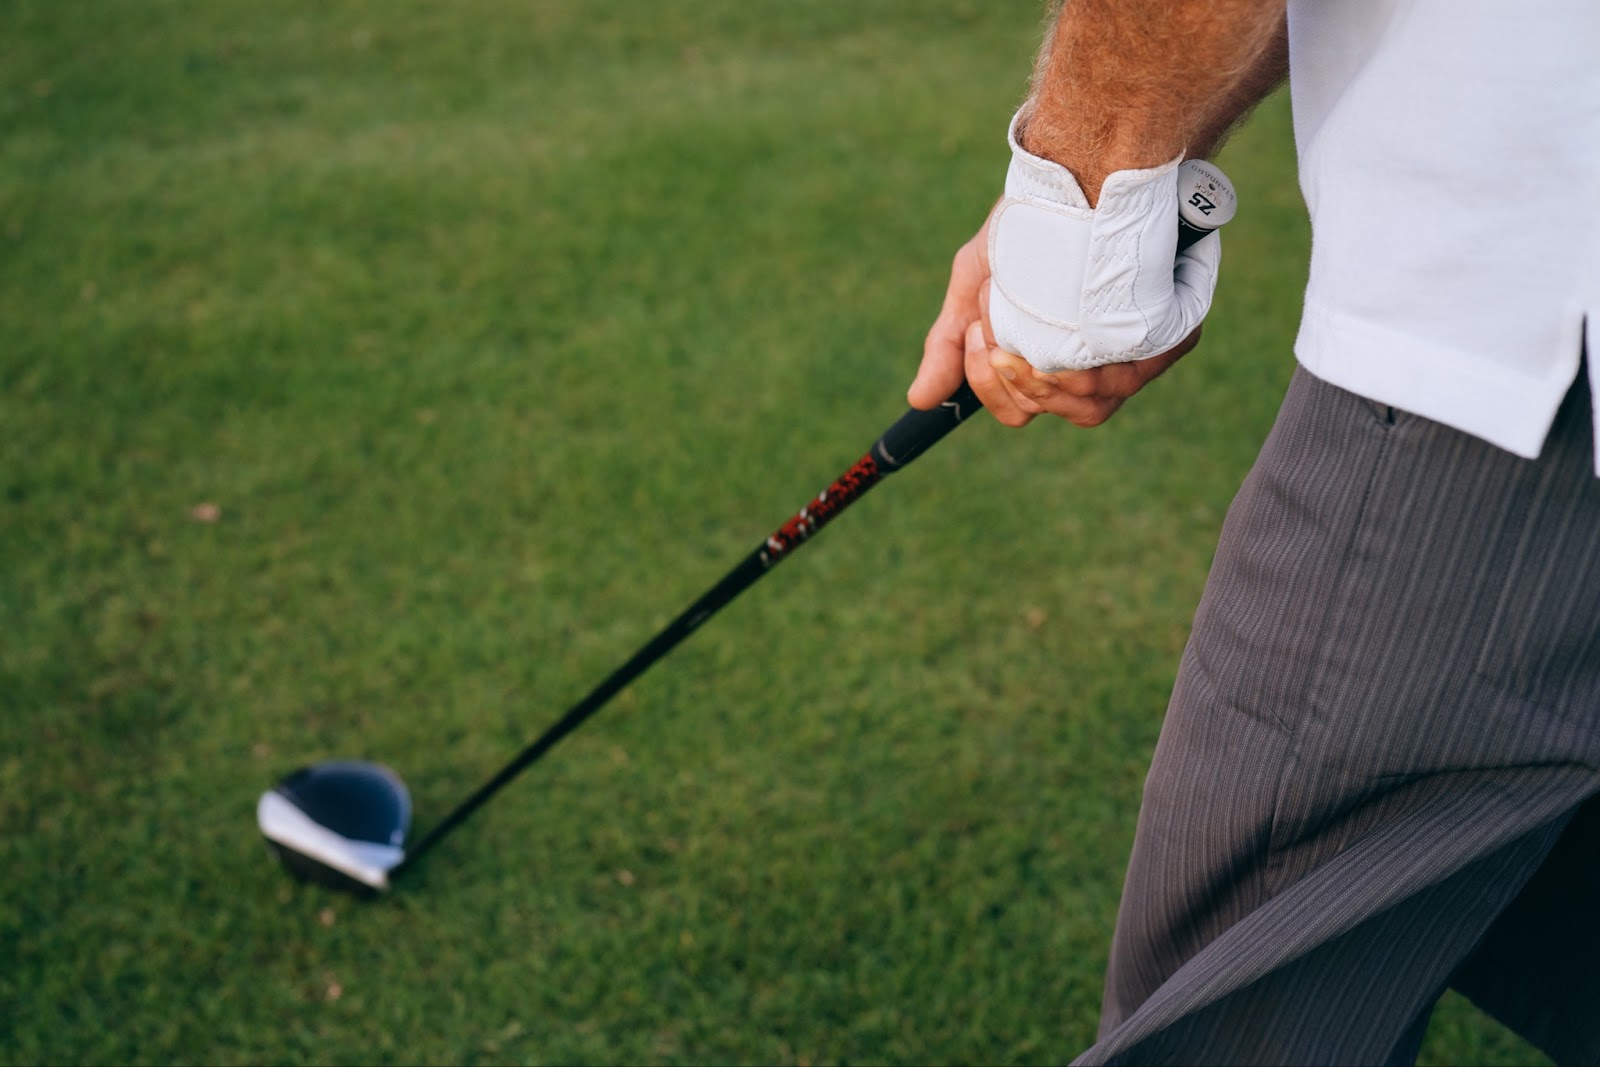 Golf Grip Tips: 5 Tips to Nail Proper Golf Grip and Improve Your Game